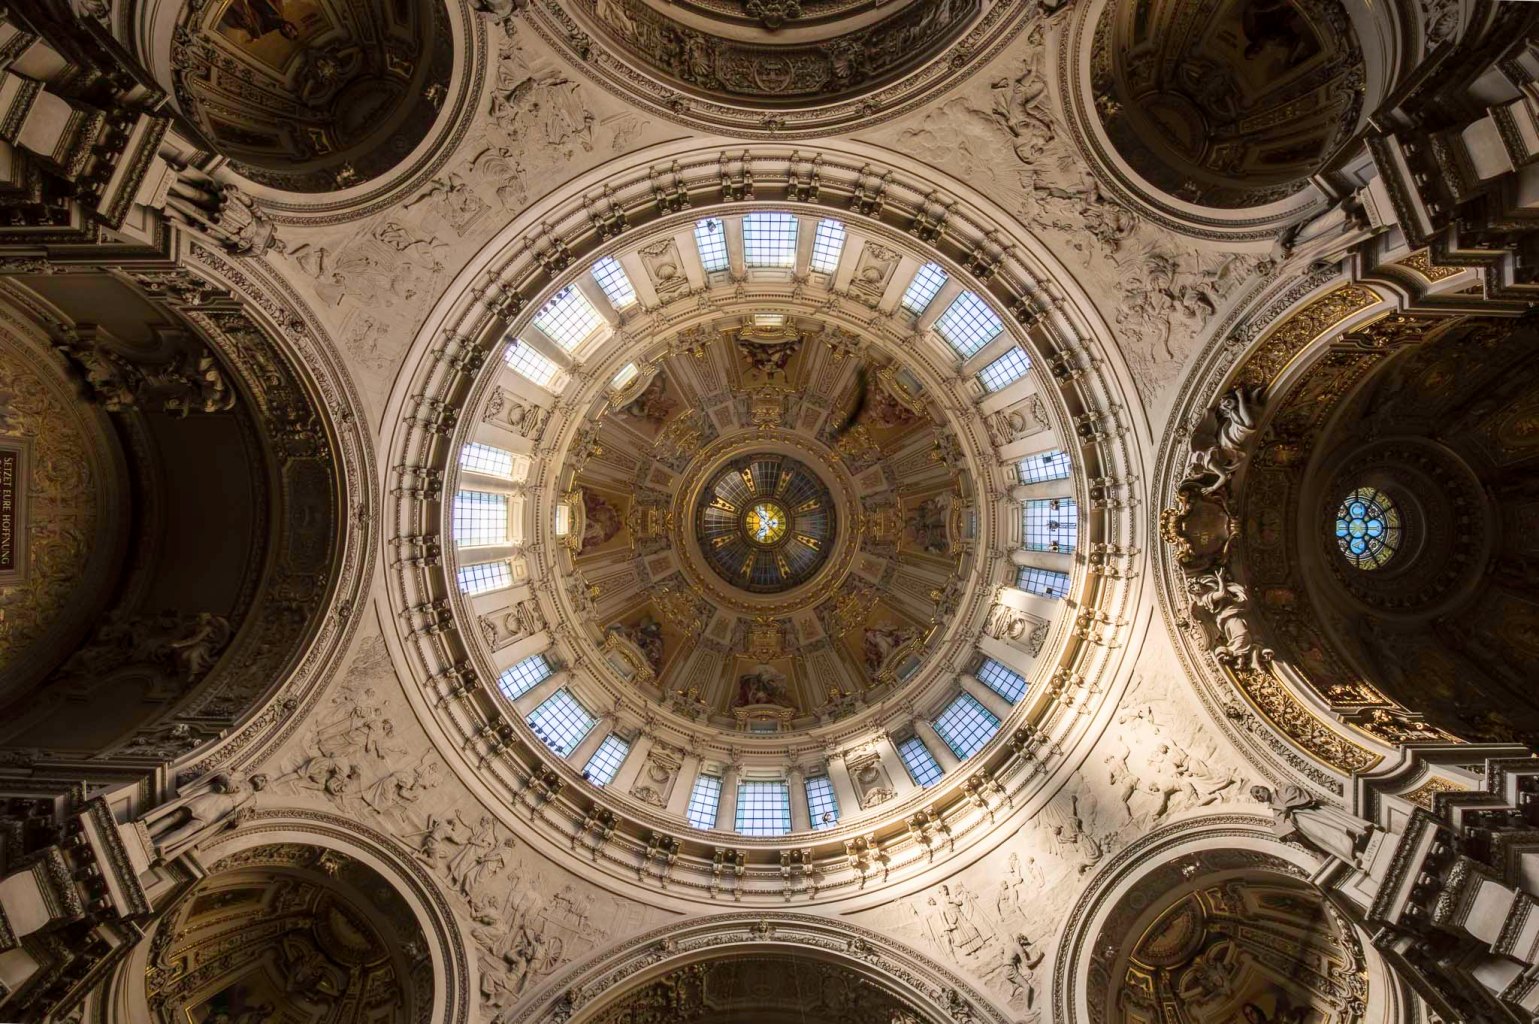 The cupola of Berlin cathedral viewed from inside